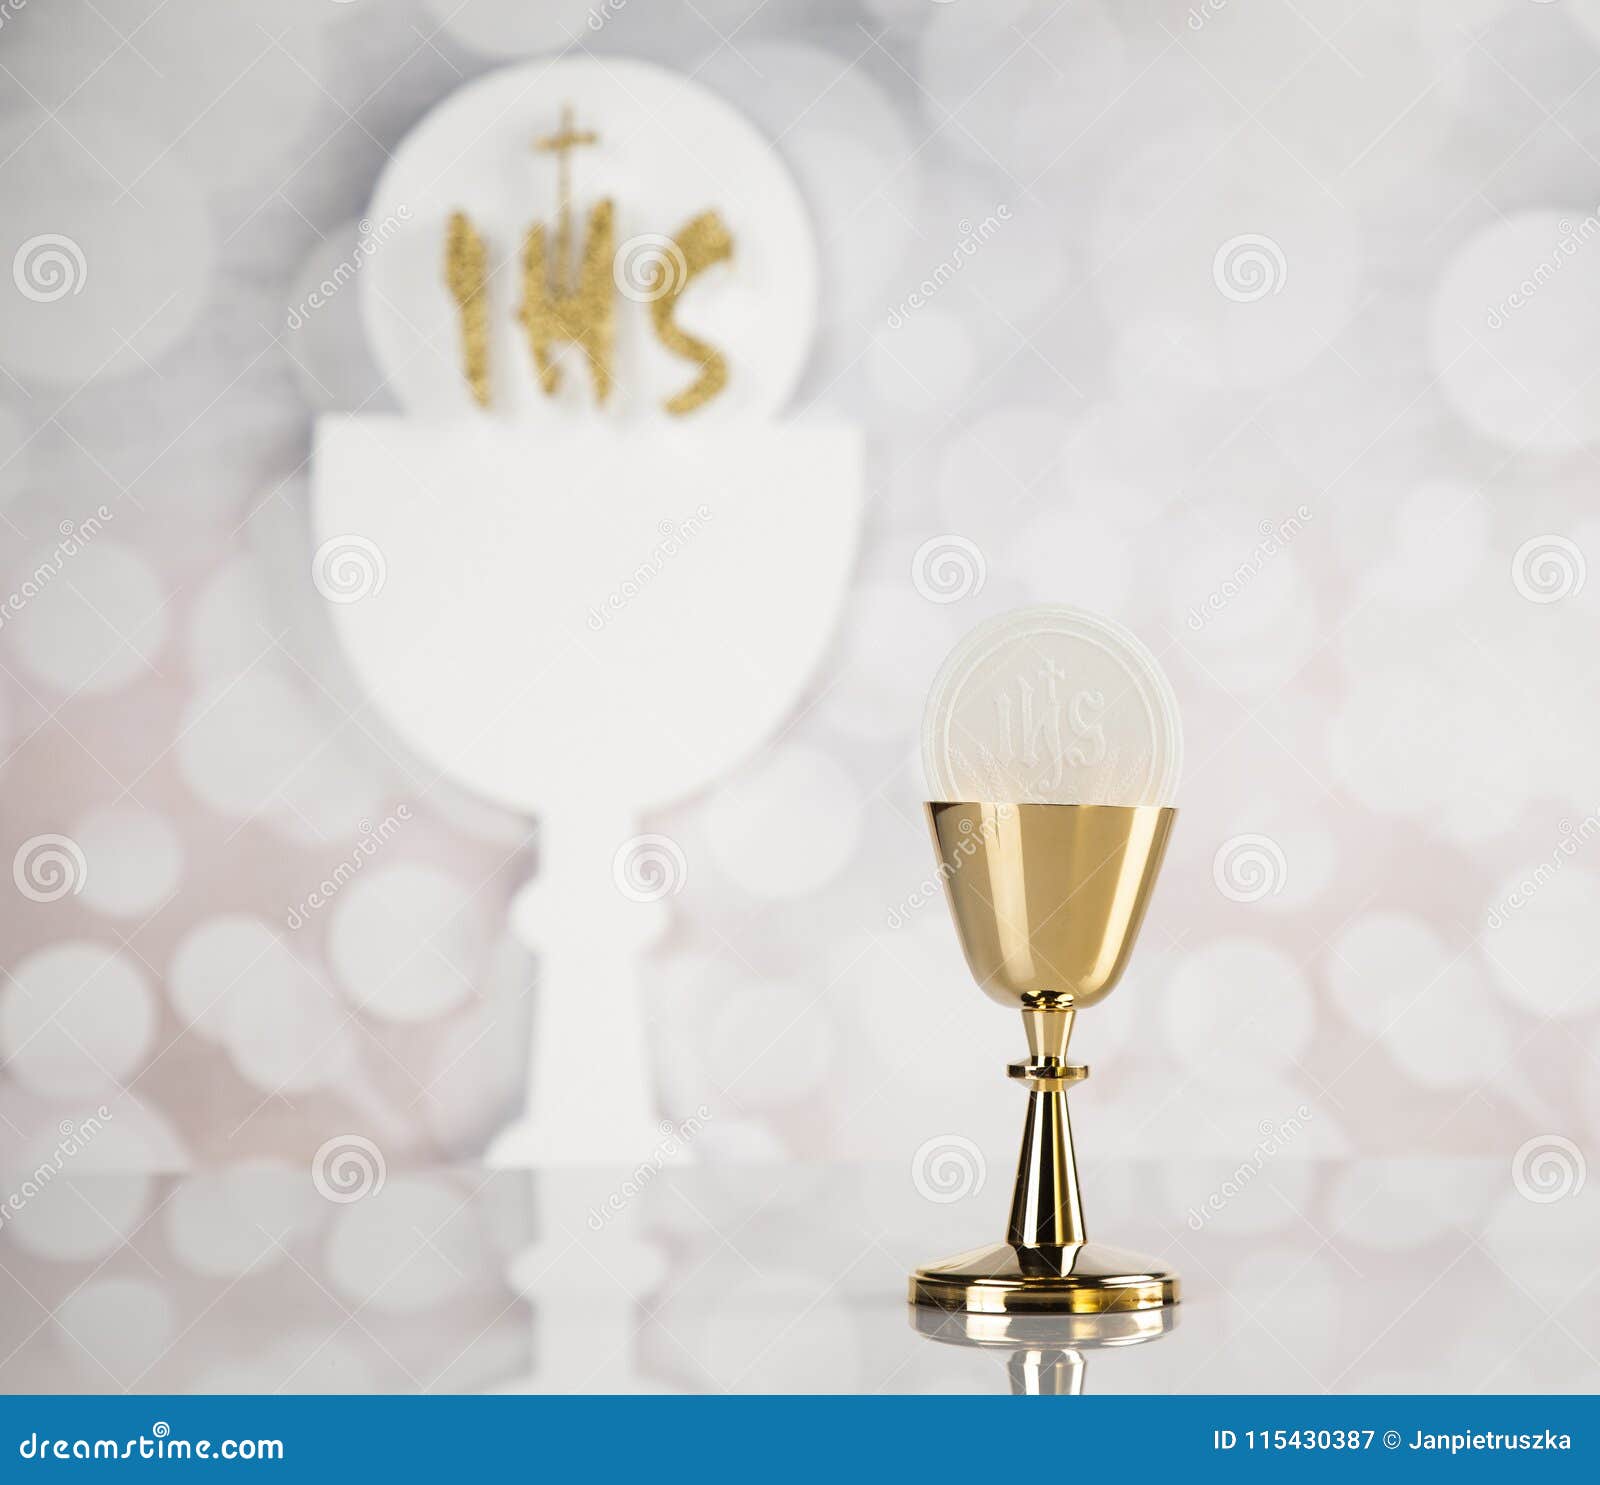 Holy Communion A Golden Chalice, Composition Isolated On White Stock ...